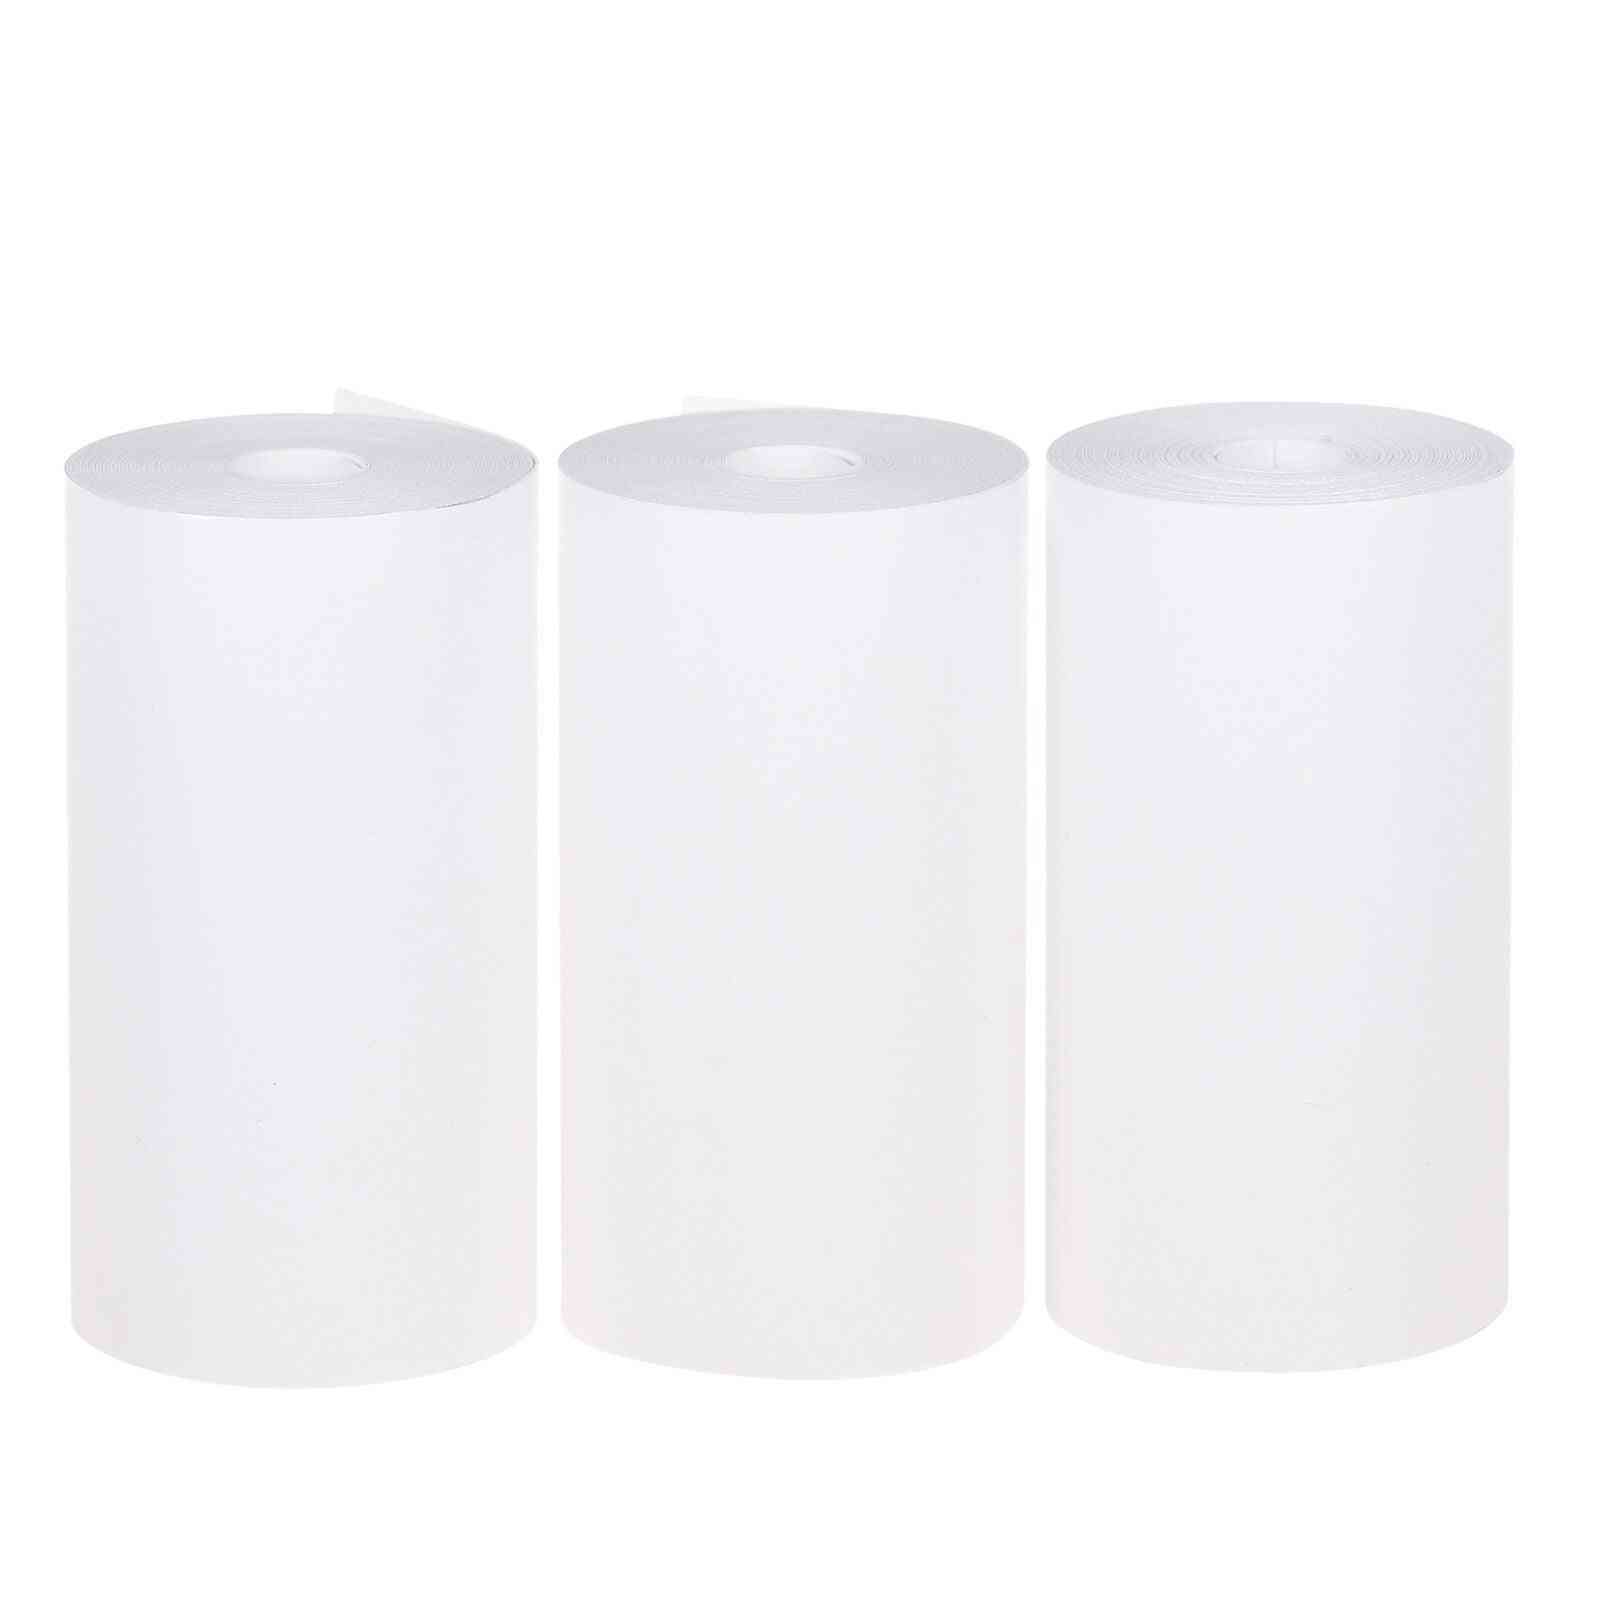 Thermal Paper Roll Receipt Paper Self-adhesive Lasting For Pocket Thermal